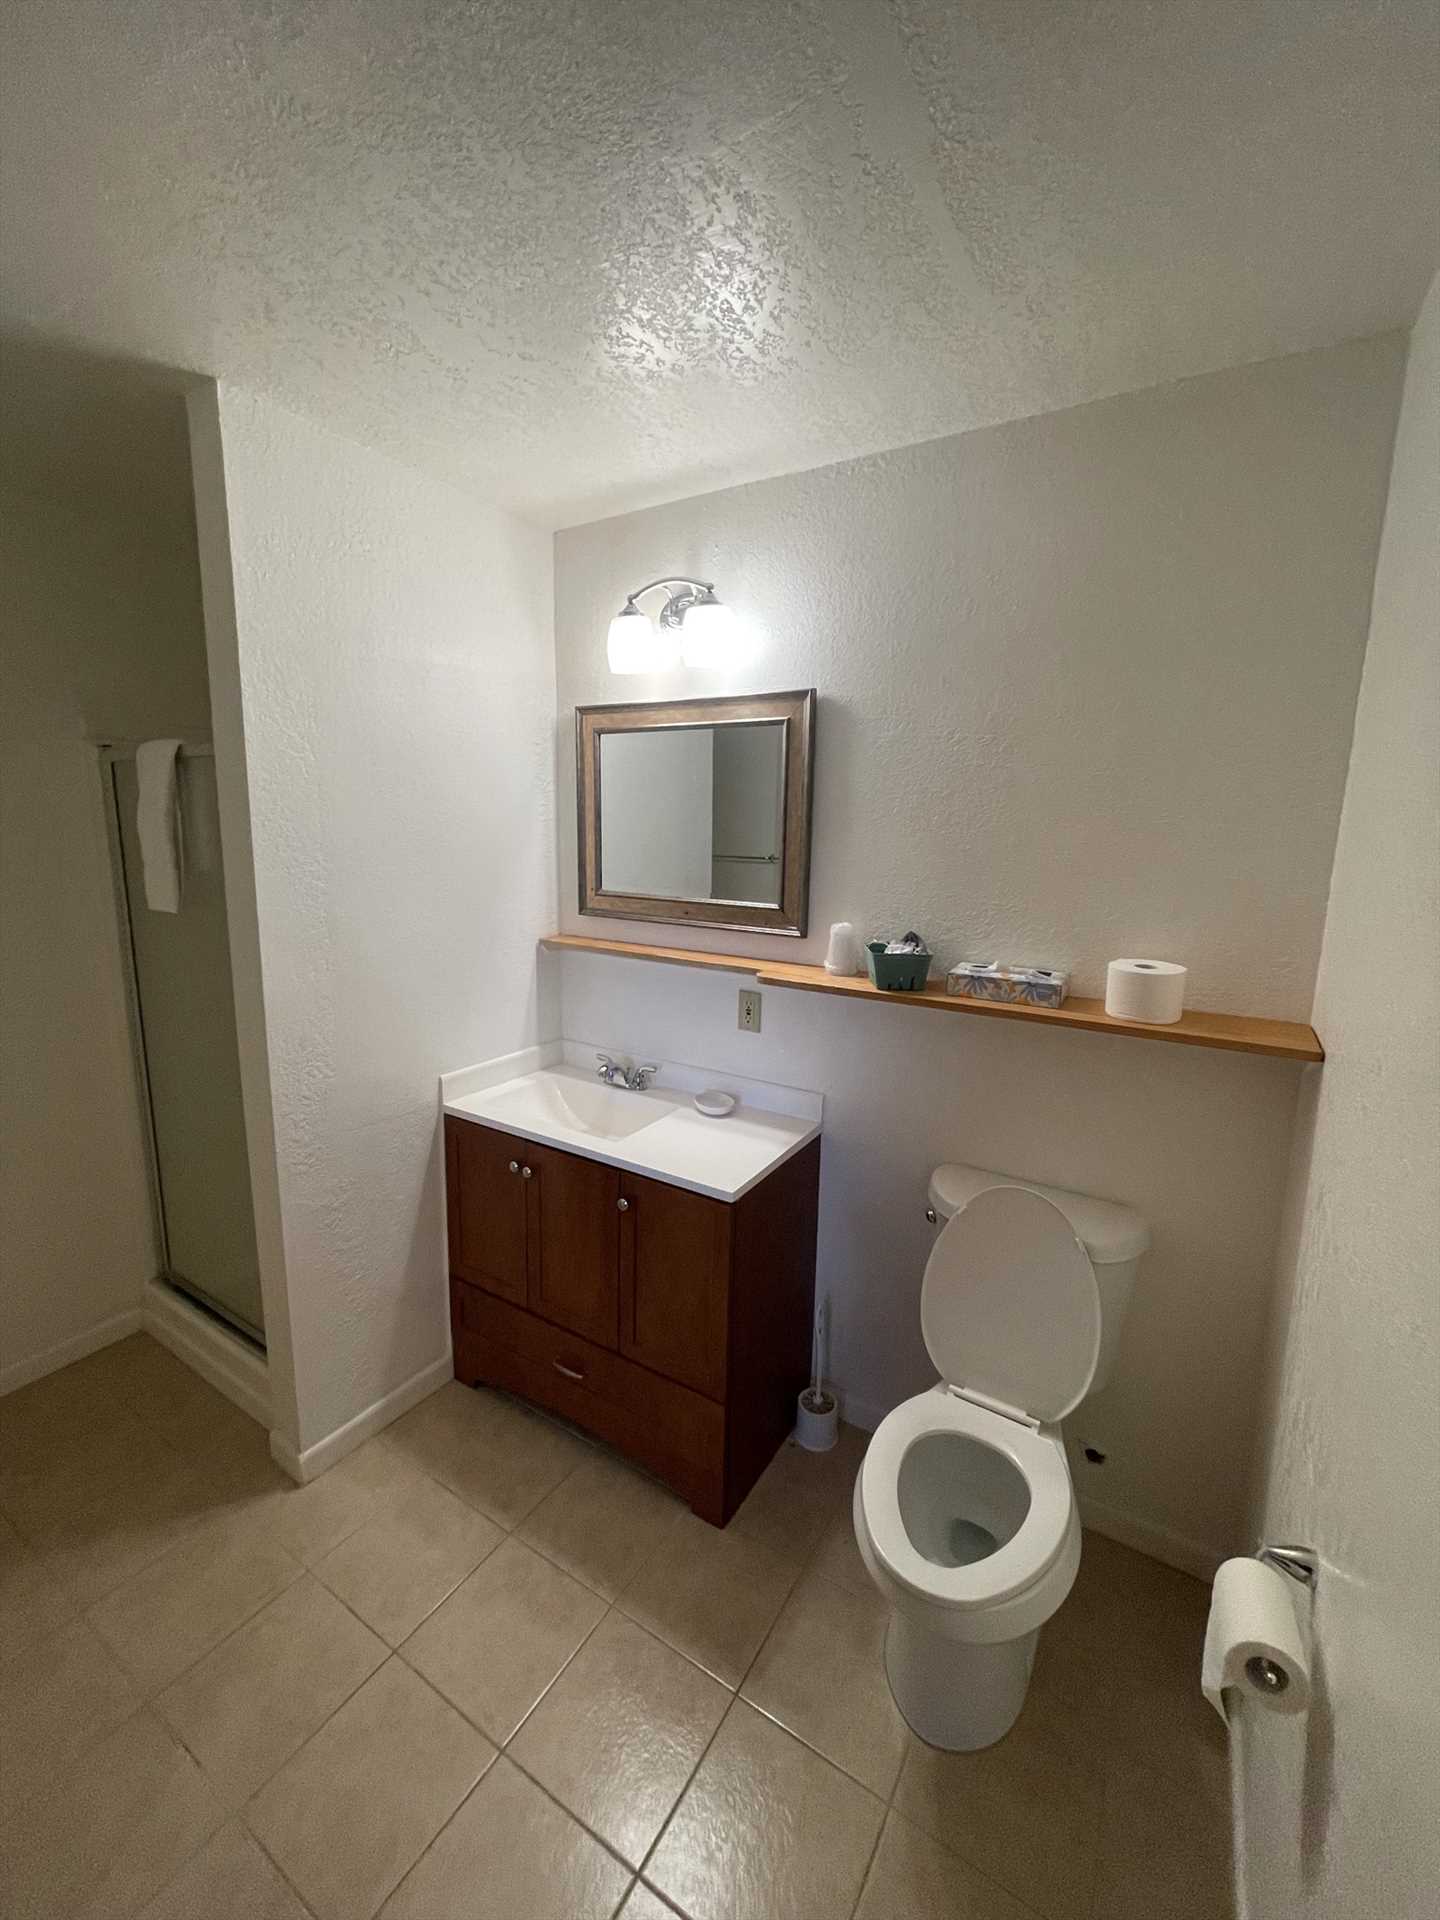                                                 The full bath is kept immaculately clean for our guests, and includes a shower stall and fresh linens for your cleanup convenience.